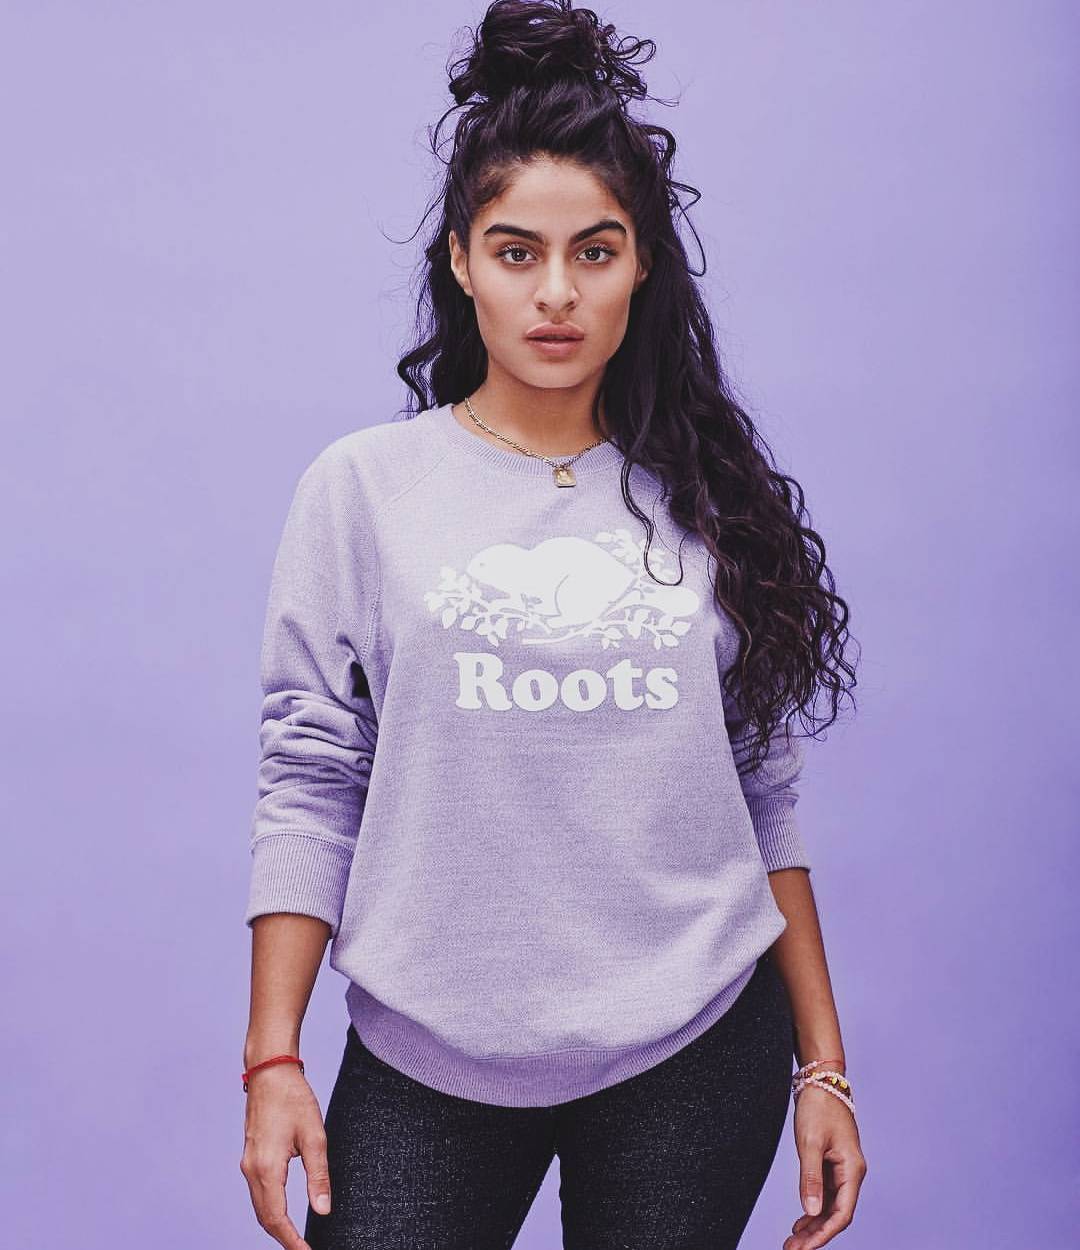 The Hottest Photos Of Jessie Reyez Will Make Your Day - 12thBlog